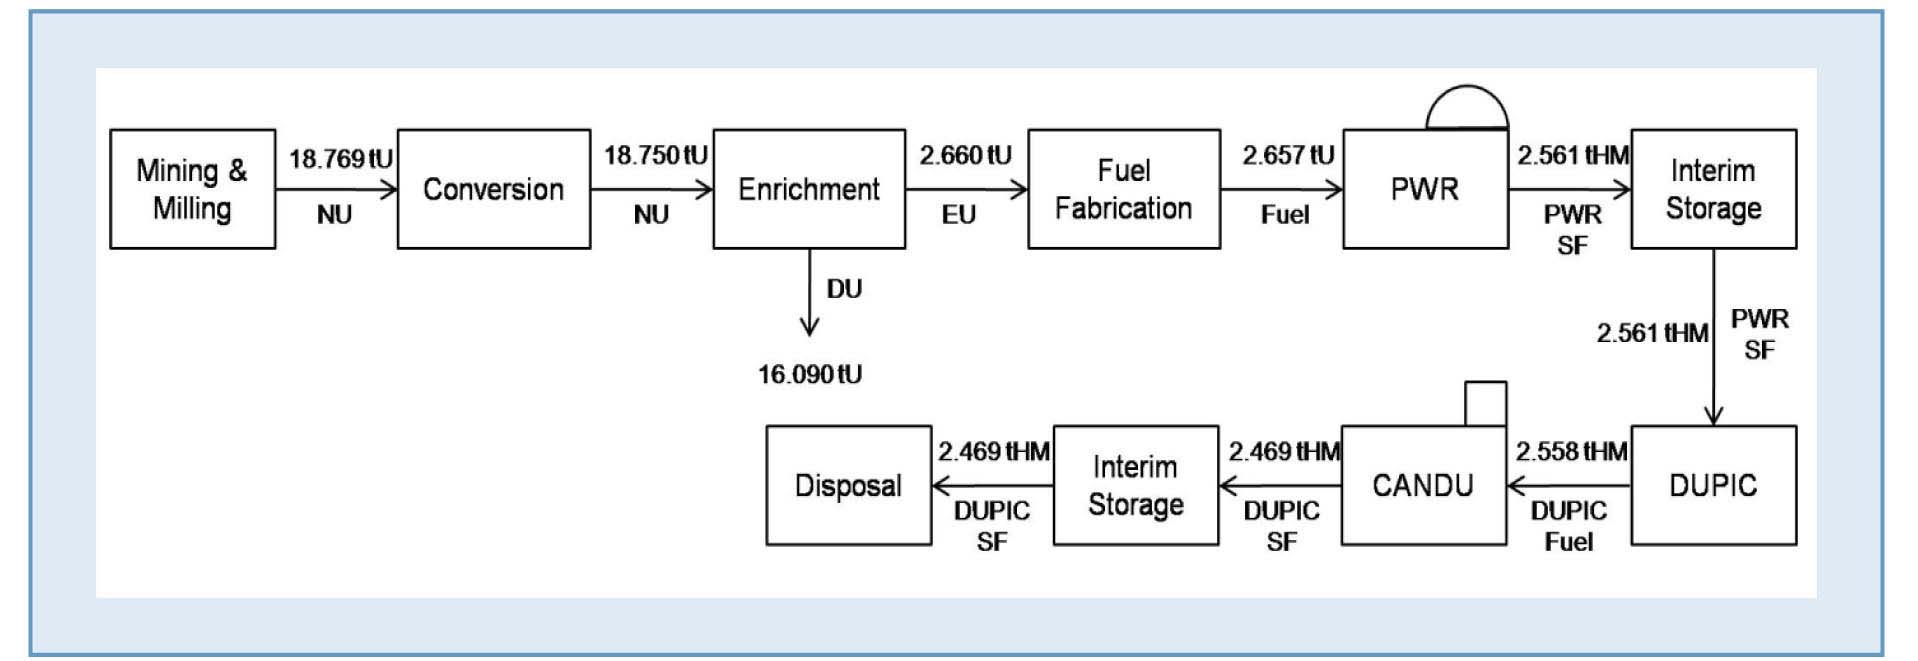 DUPIC (Direct use of Spent PWR Fuel in CANDU) Cycle